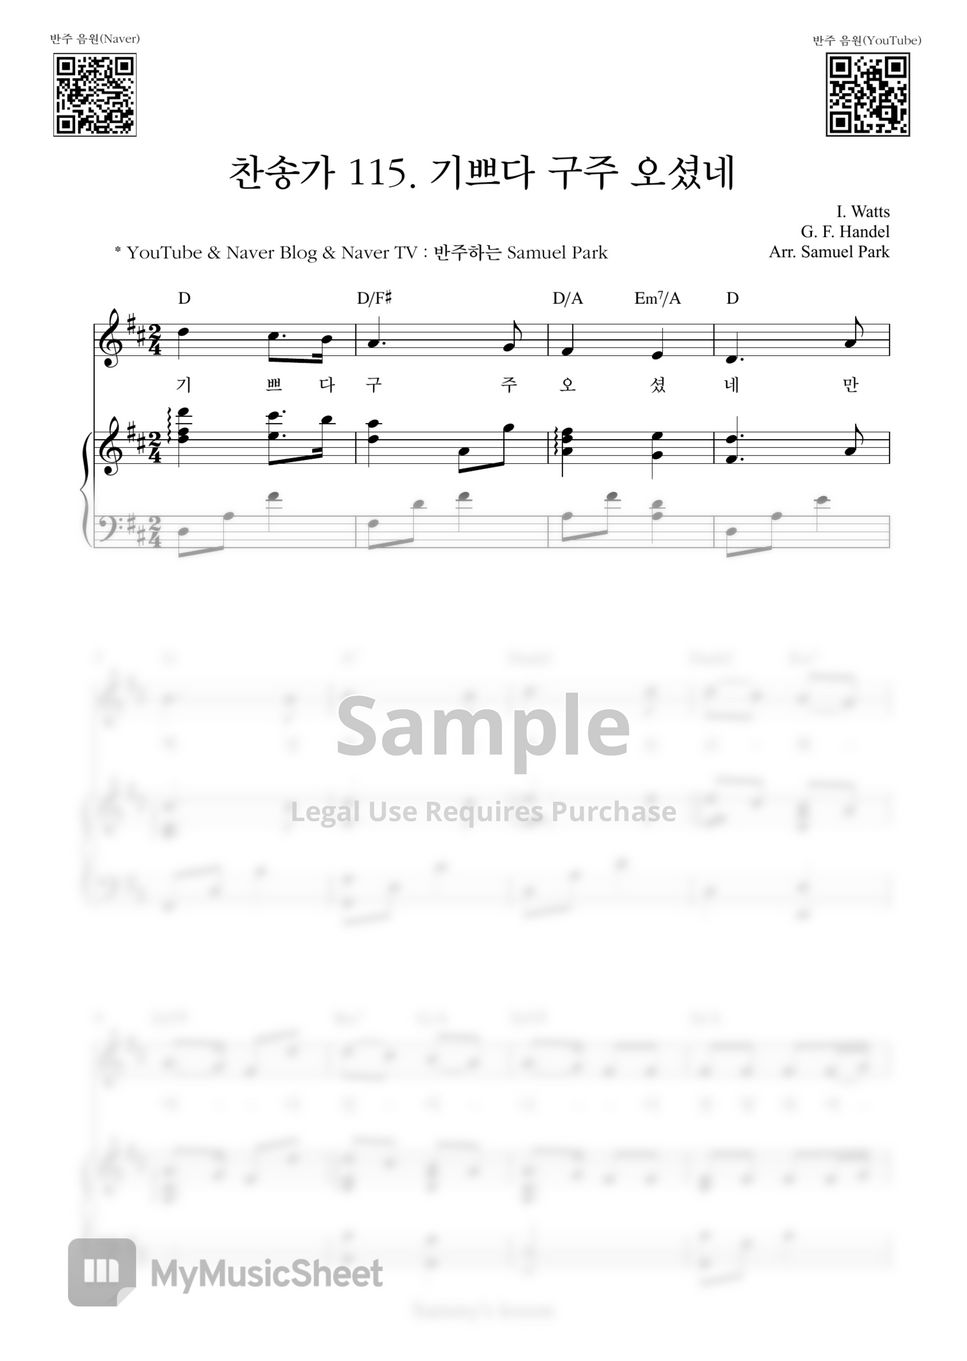 Hymn - 기쁘다 구주 오셨네 (Joy to the world) (Piano Cover) by Samuel Park